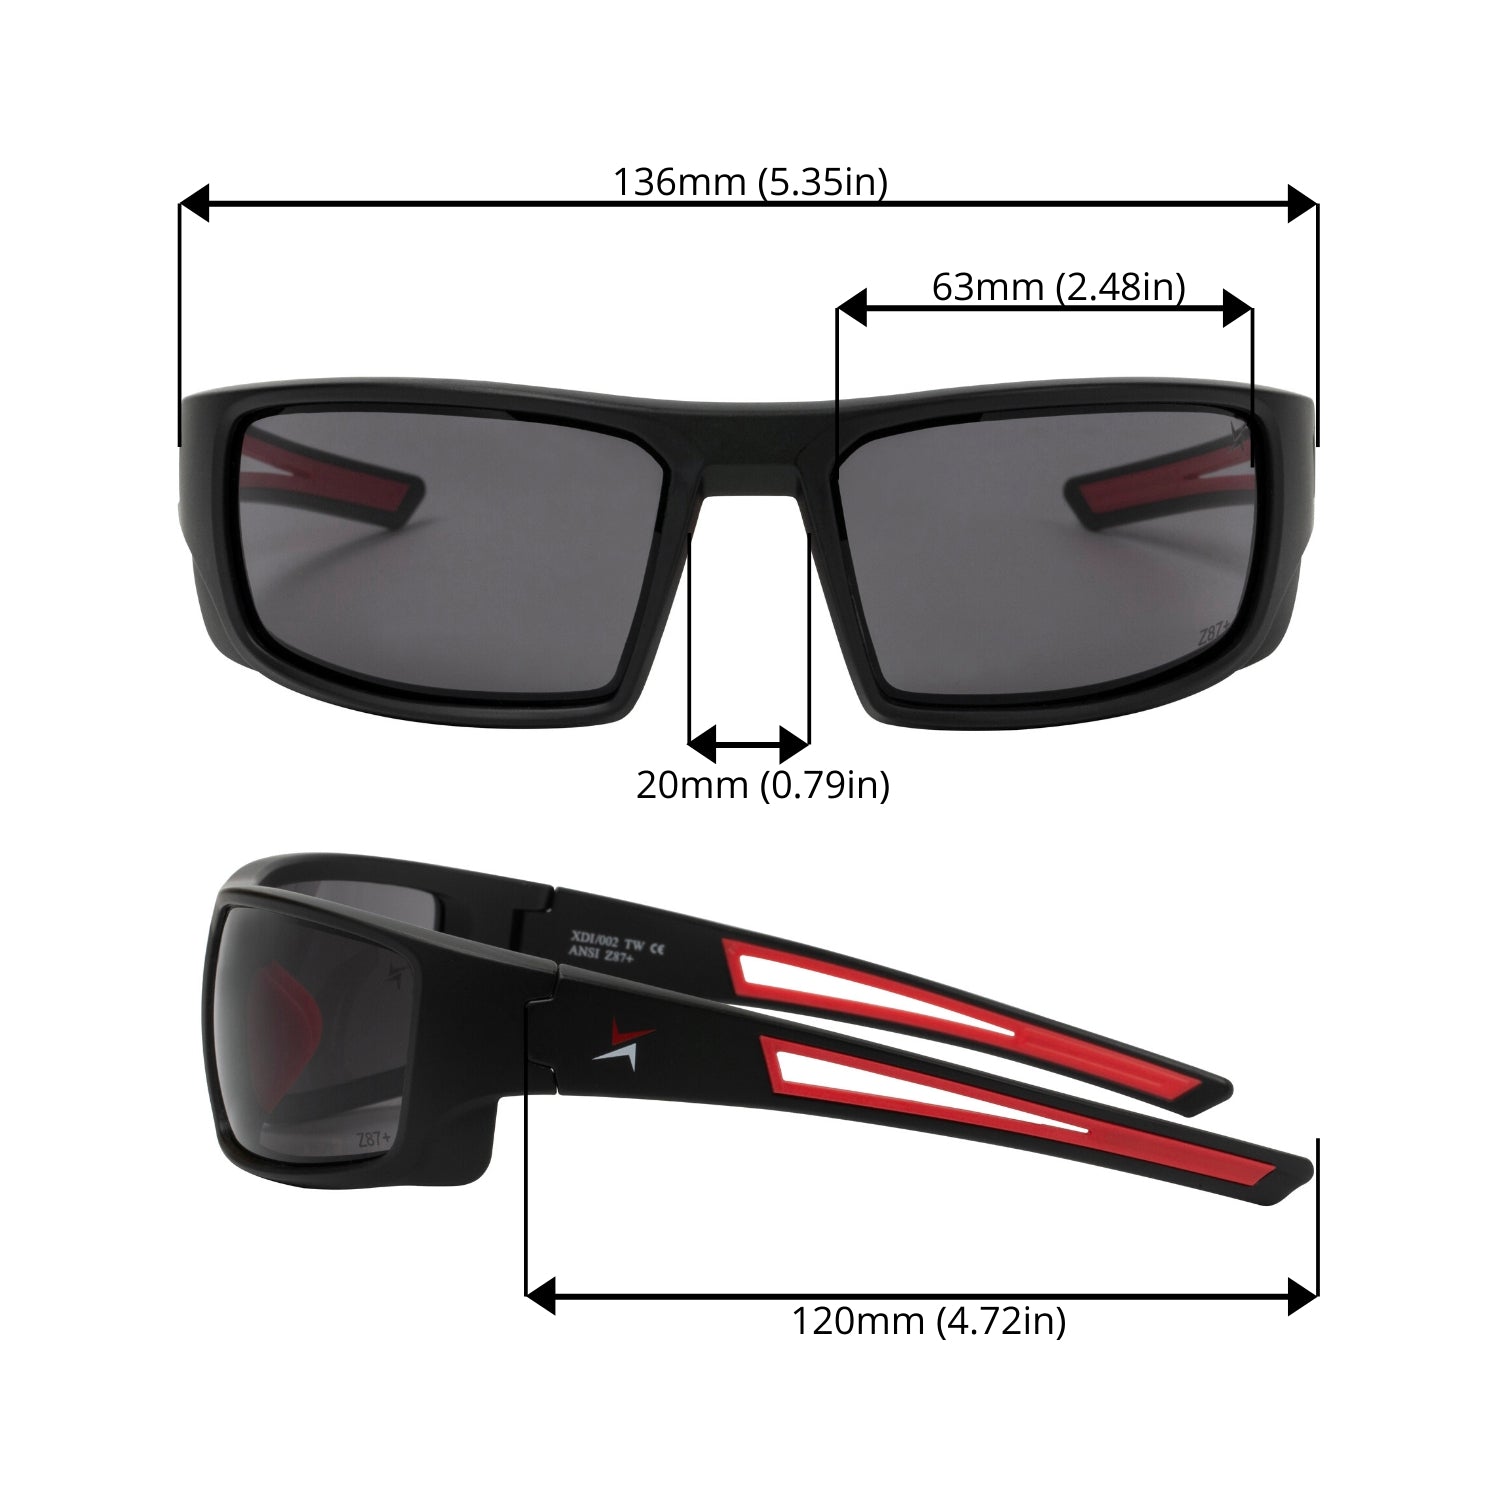 Dark Smoke Lens Sport Safety Sunglasses with Red Rubber Accents.